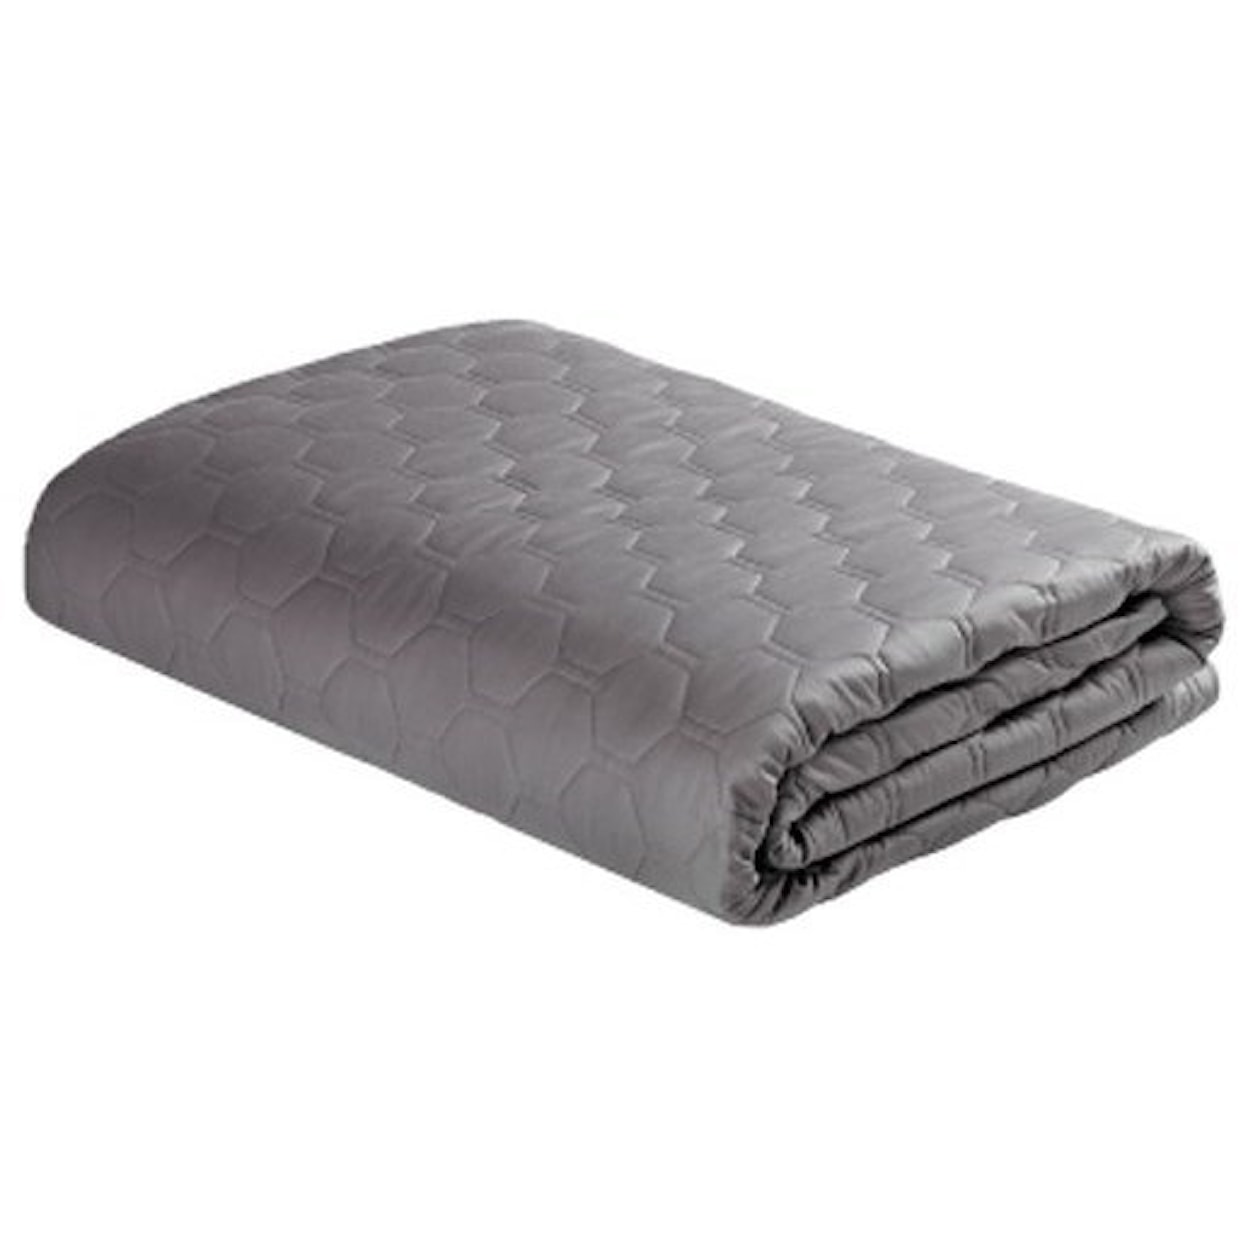 Bedgear Weighted Blanket Personal Weighted Performance Blanket